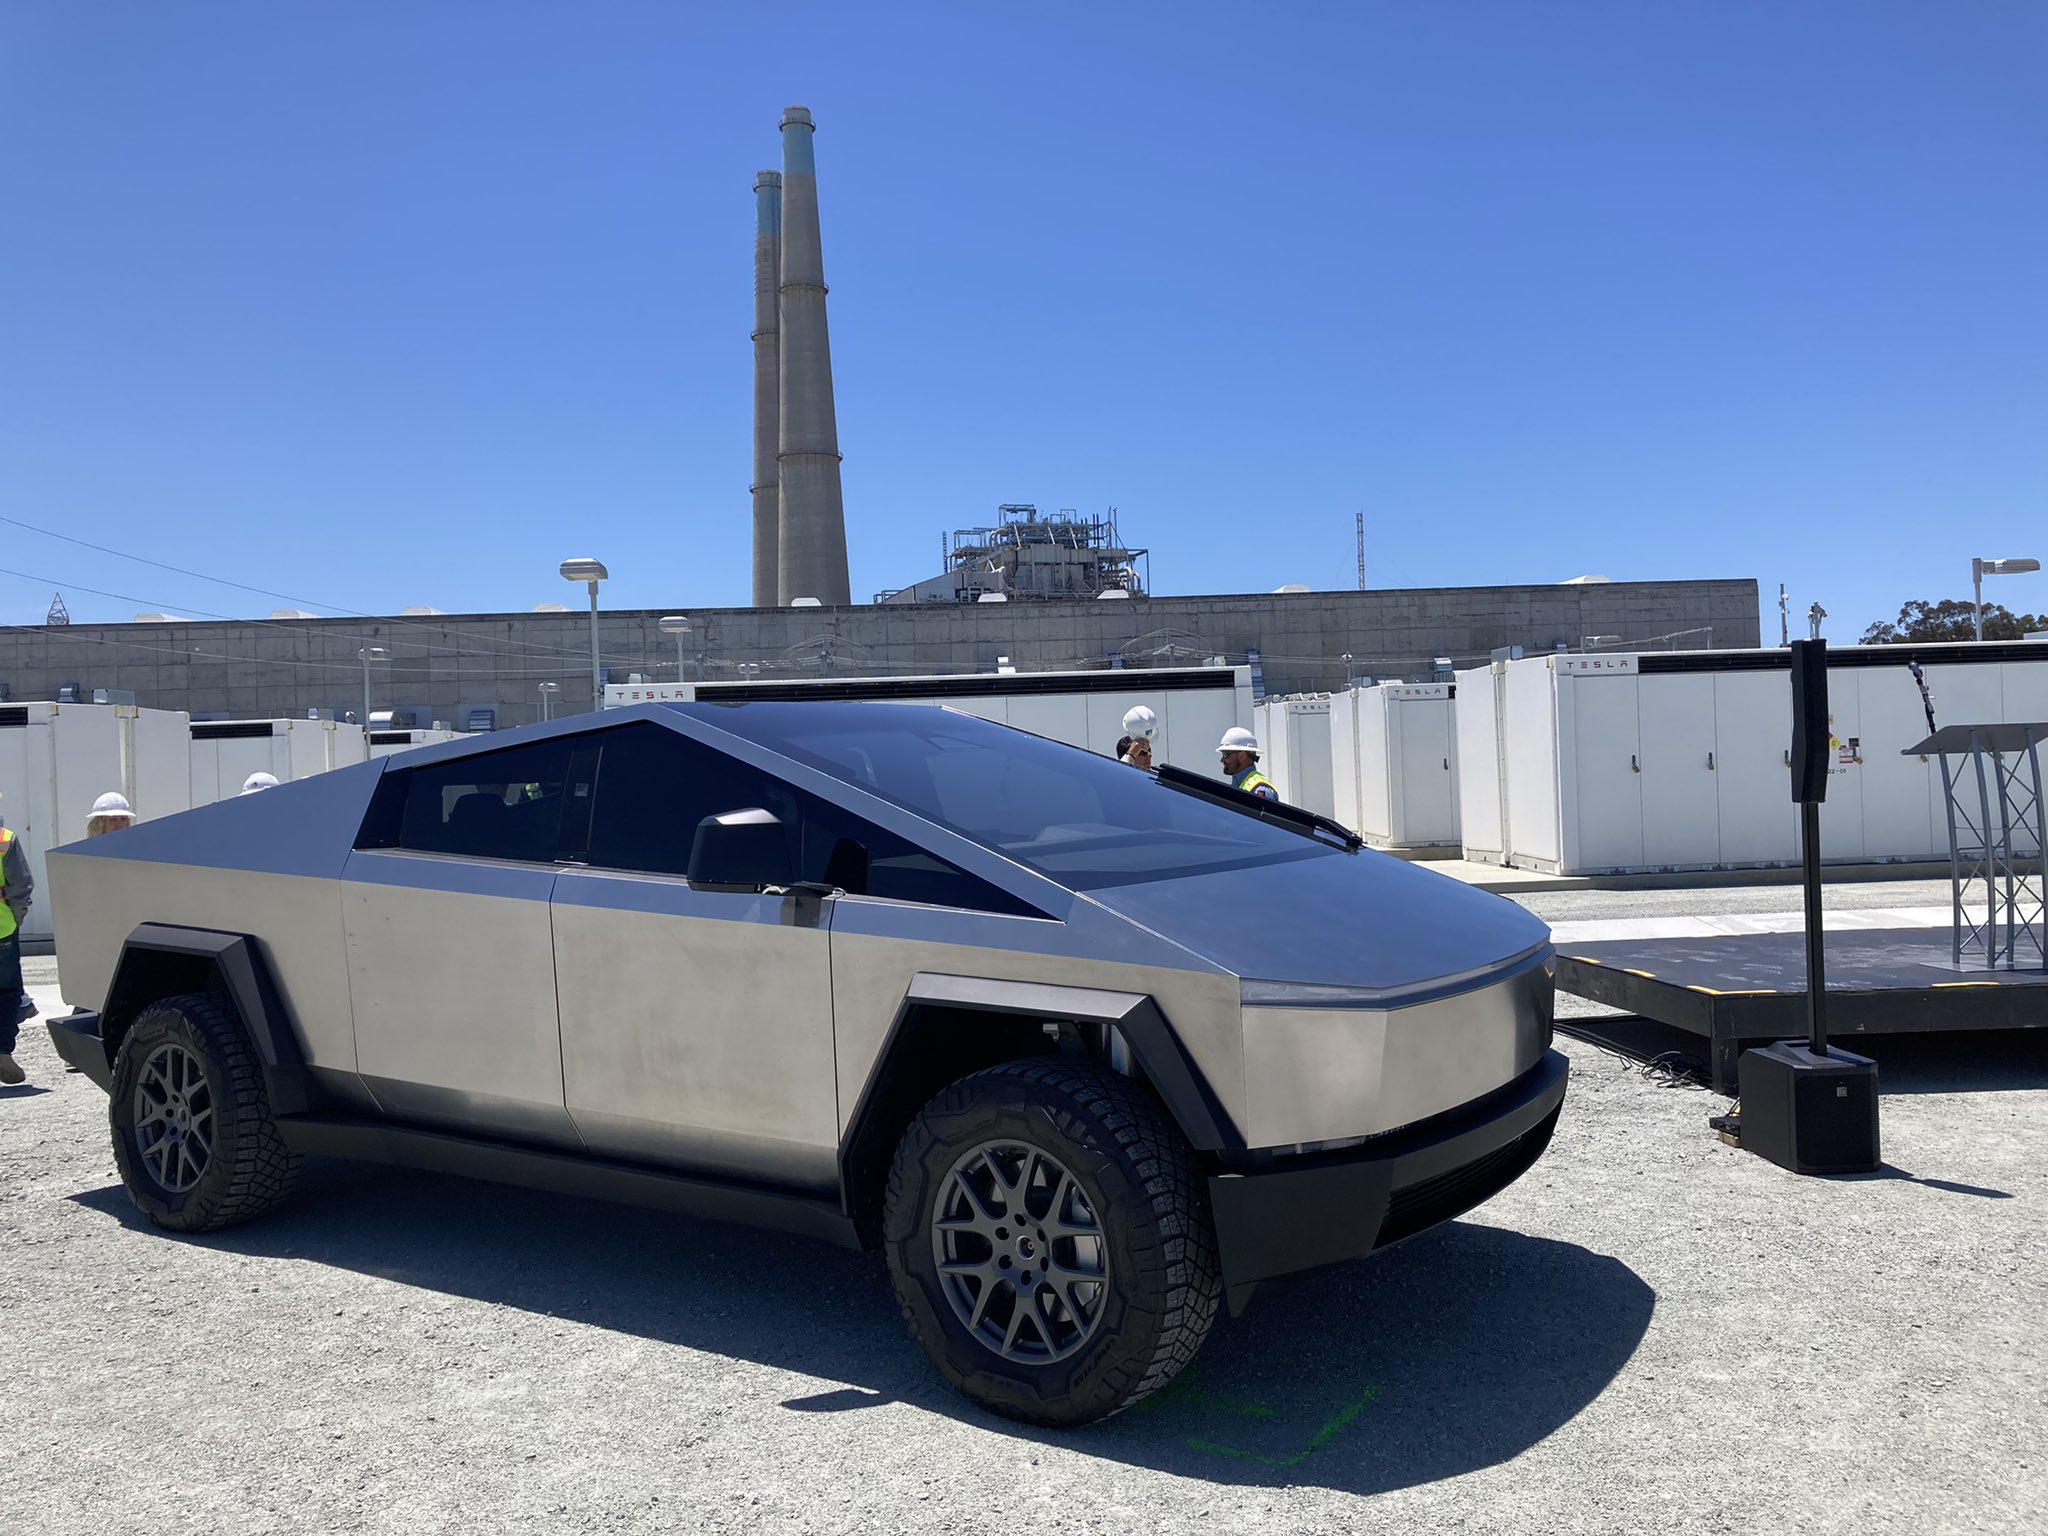 Tesla Cybertruck makes guest appearance at commissioning of Elkhorn ...